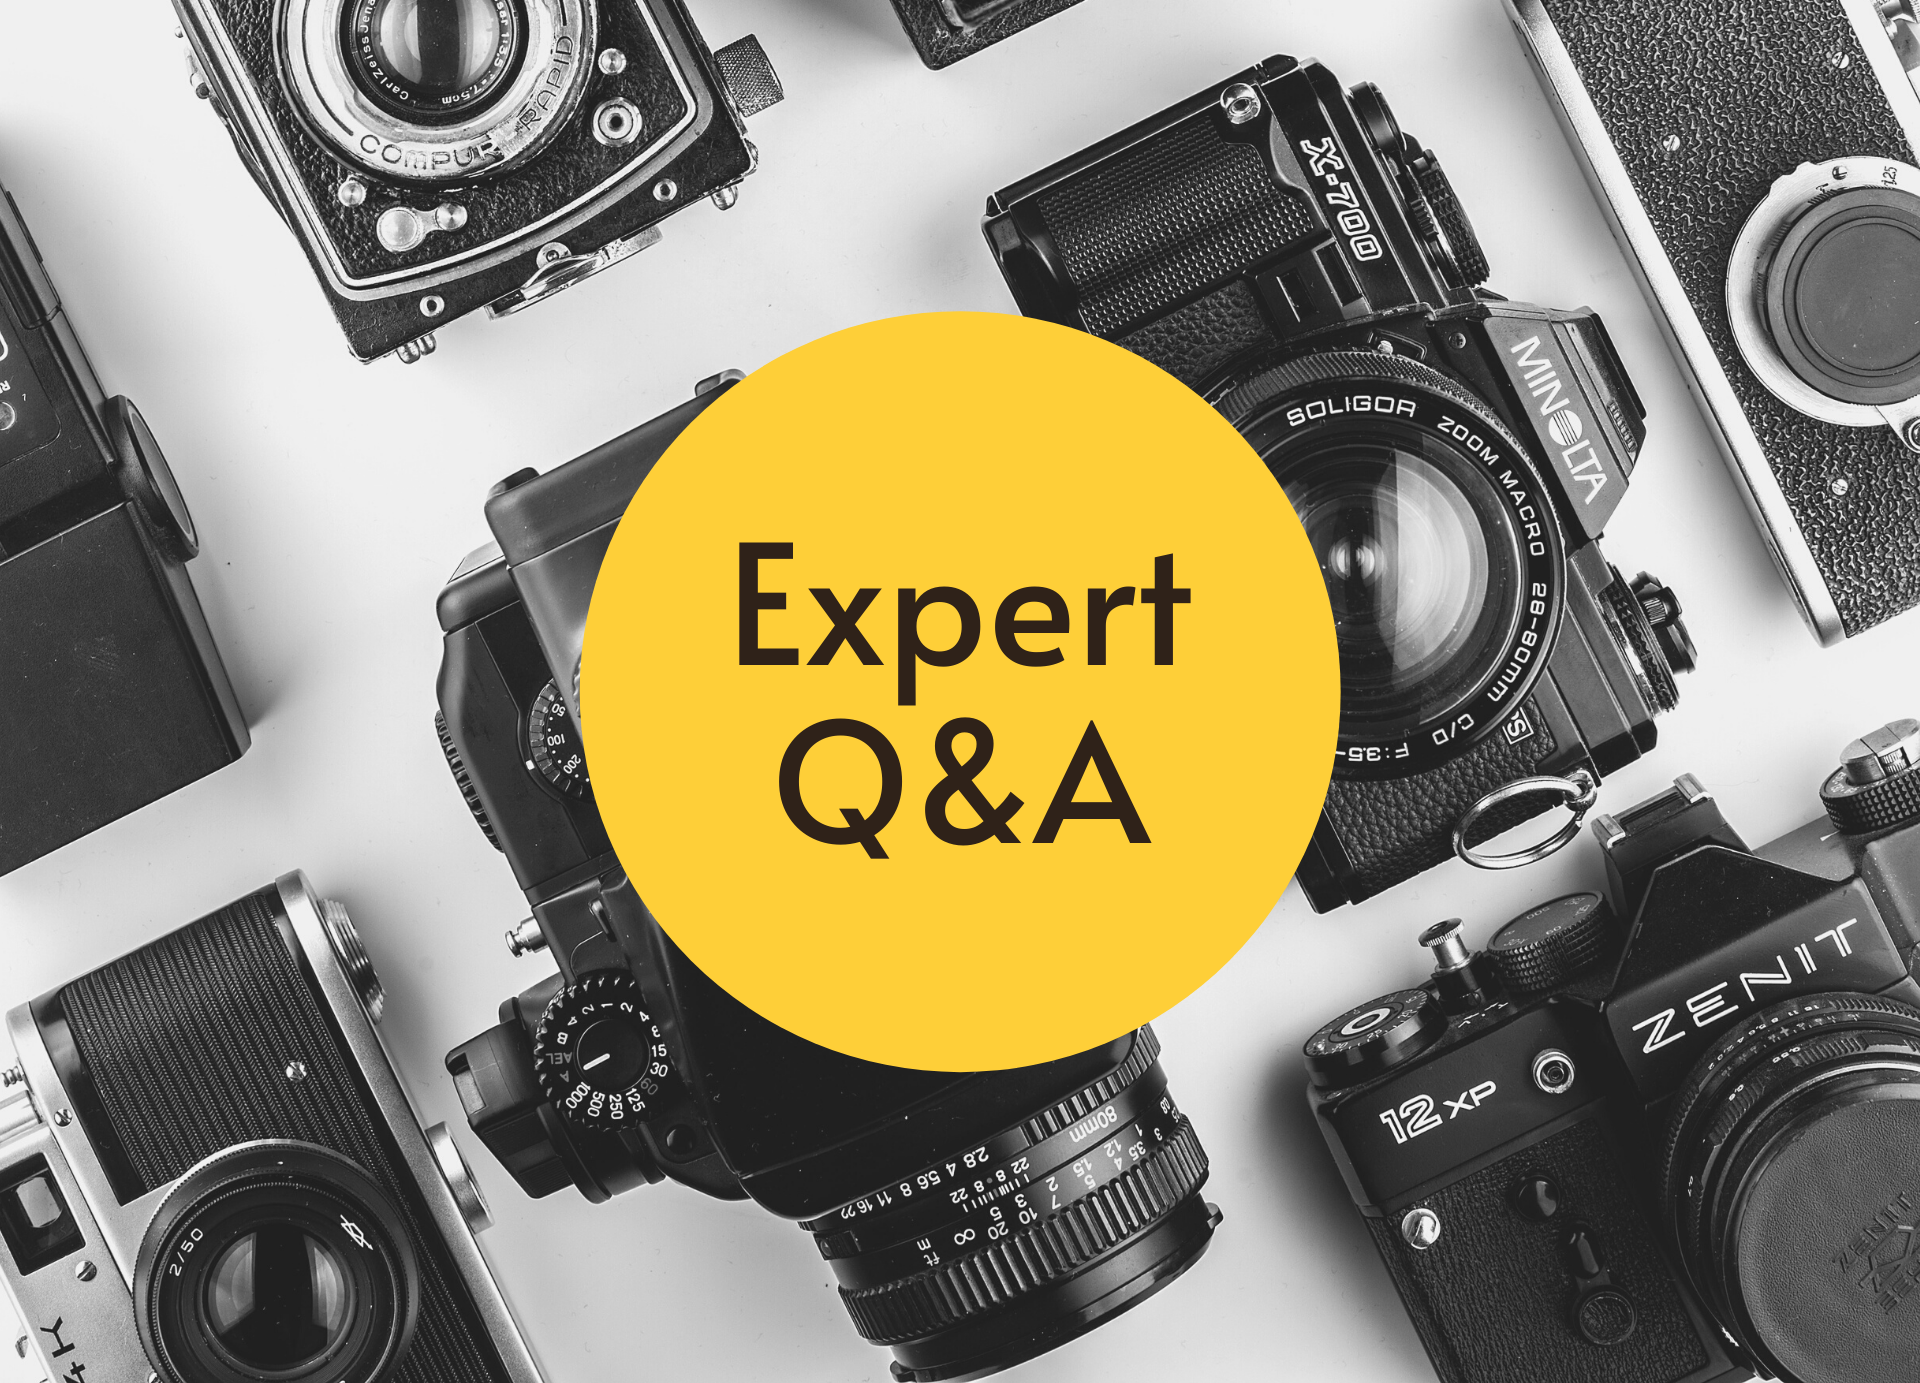 A black-and-white image of many cameras with the words "Expert Q&A" on a yellow circle